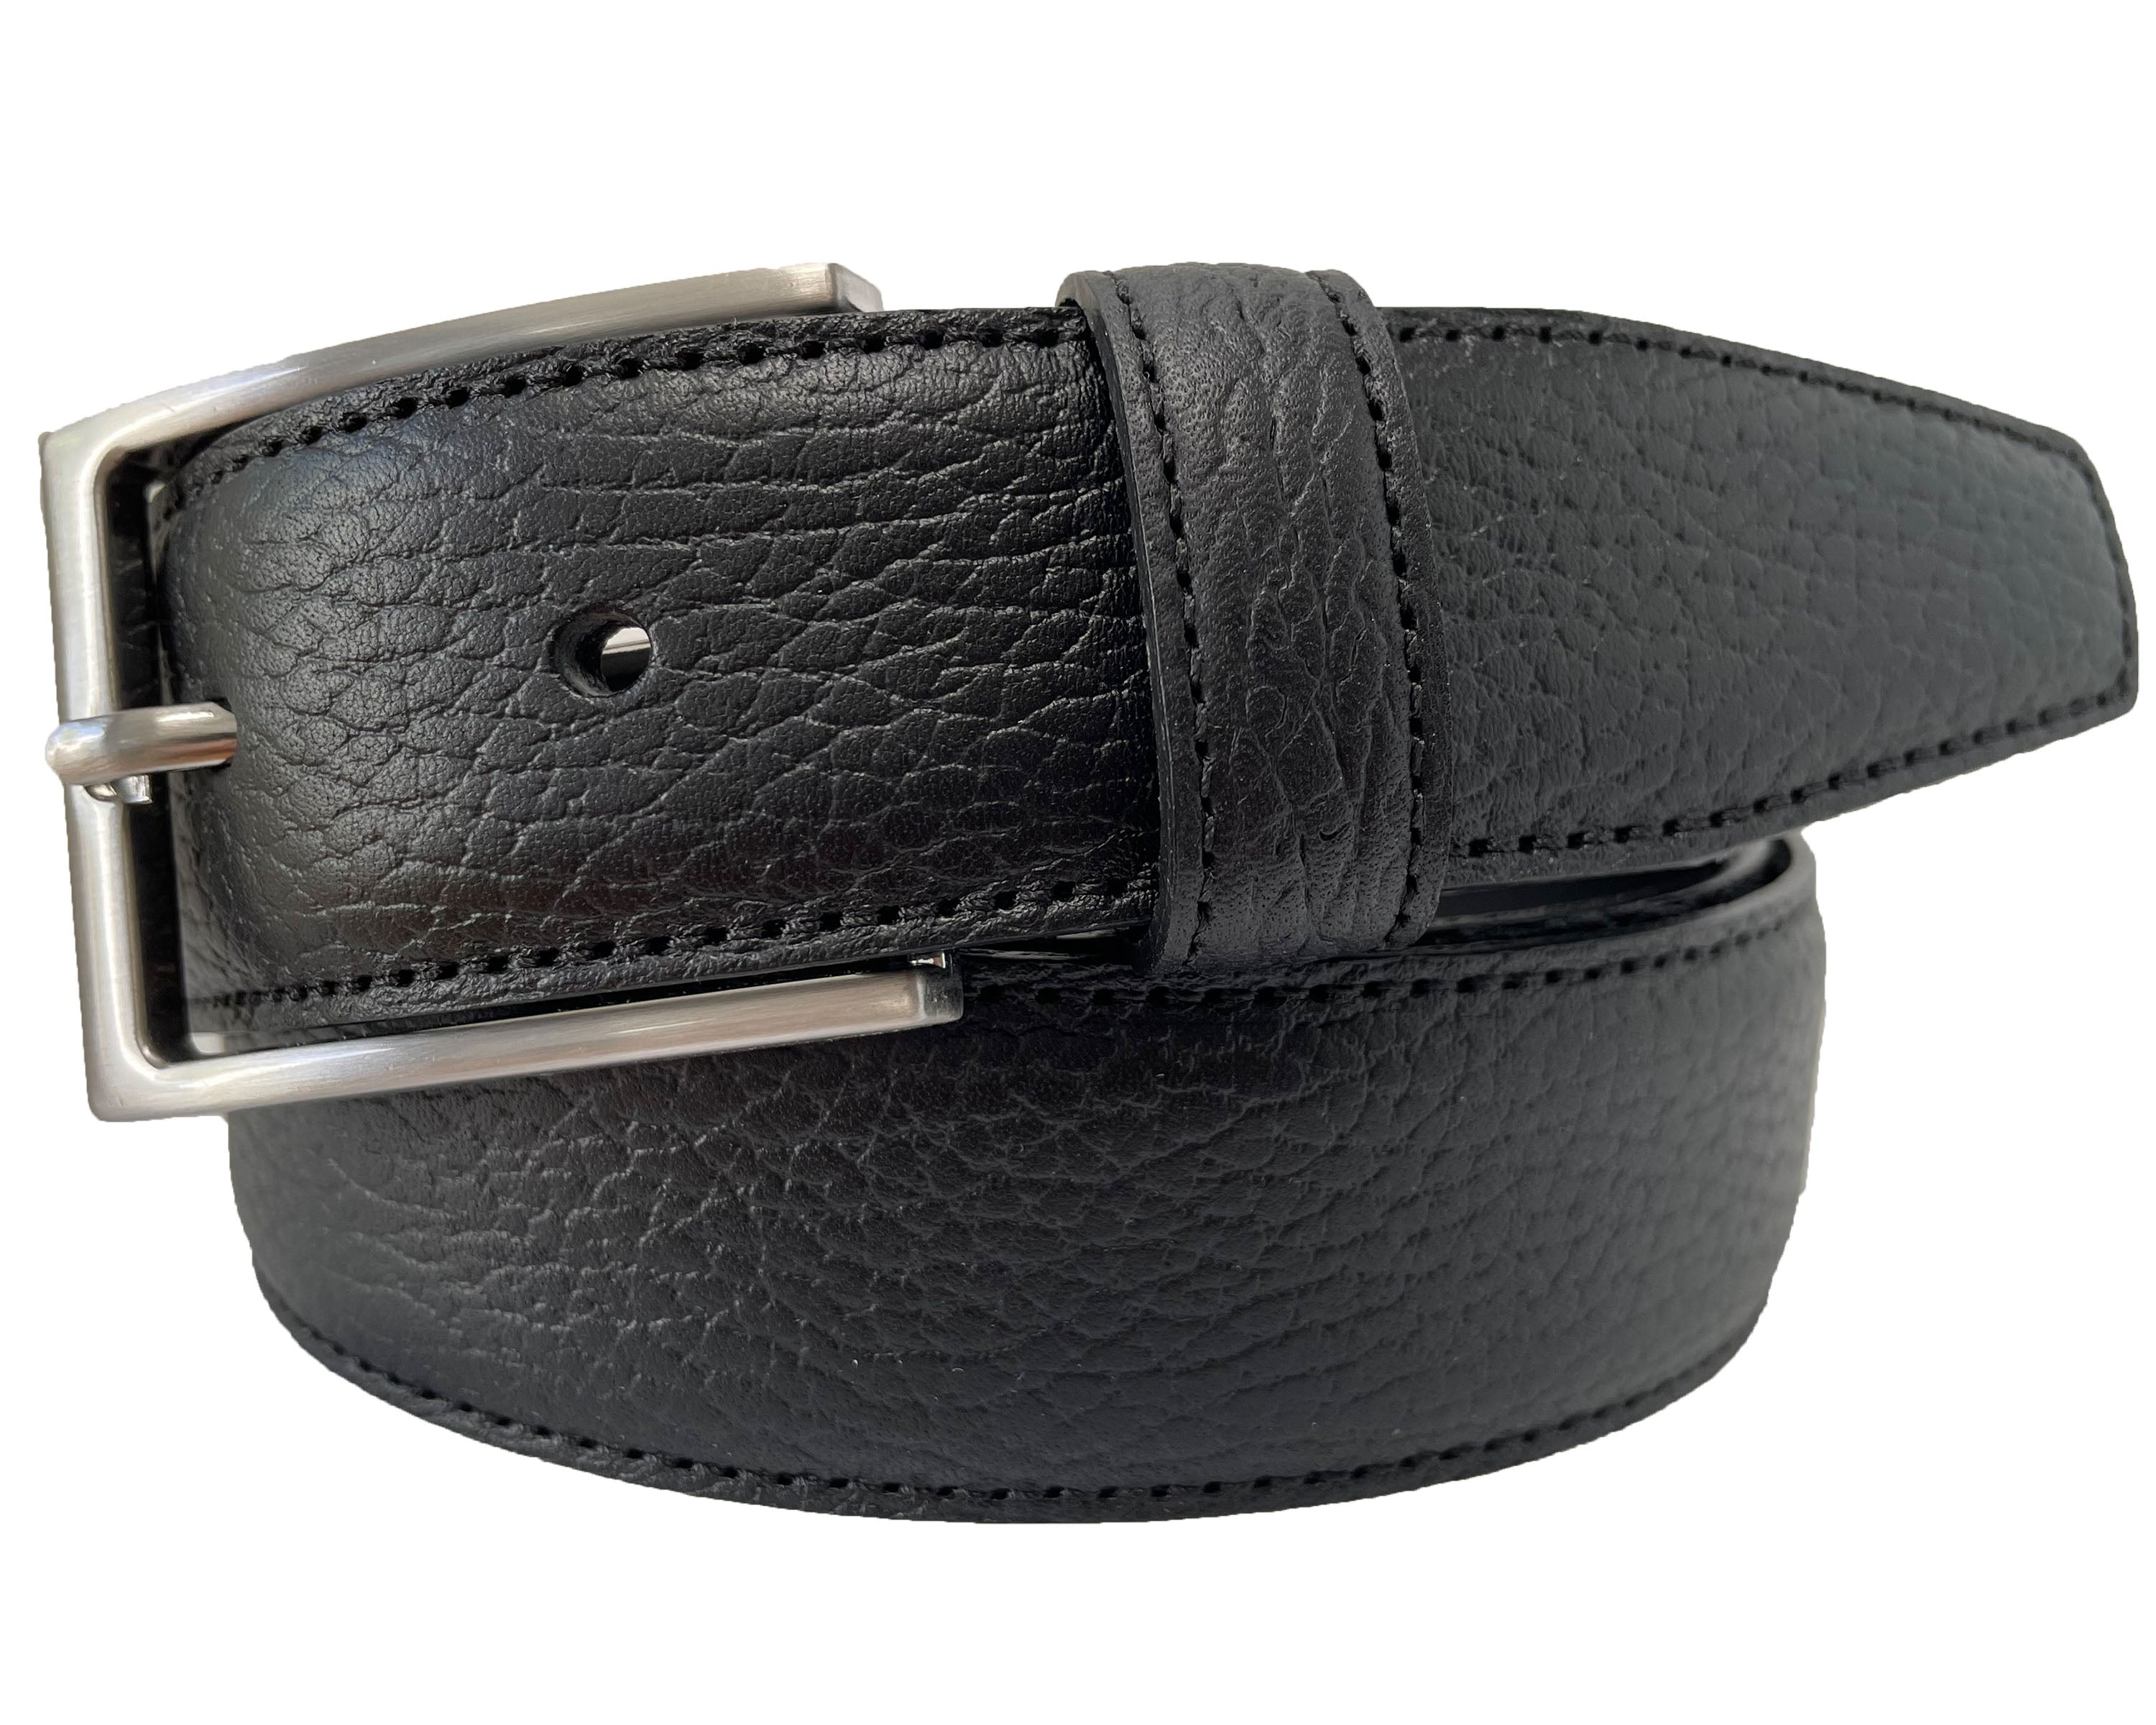 GRAINED BLACK CALF LEATHER SINGLE STITCHED 35MM LEATHER BELT